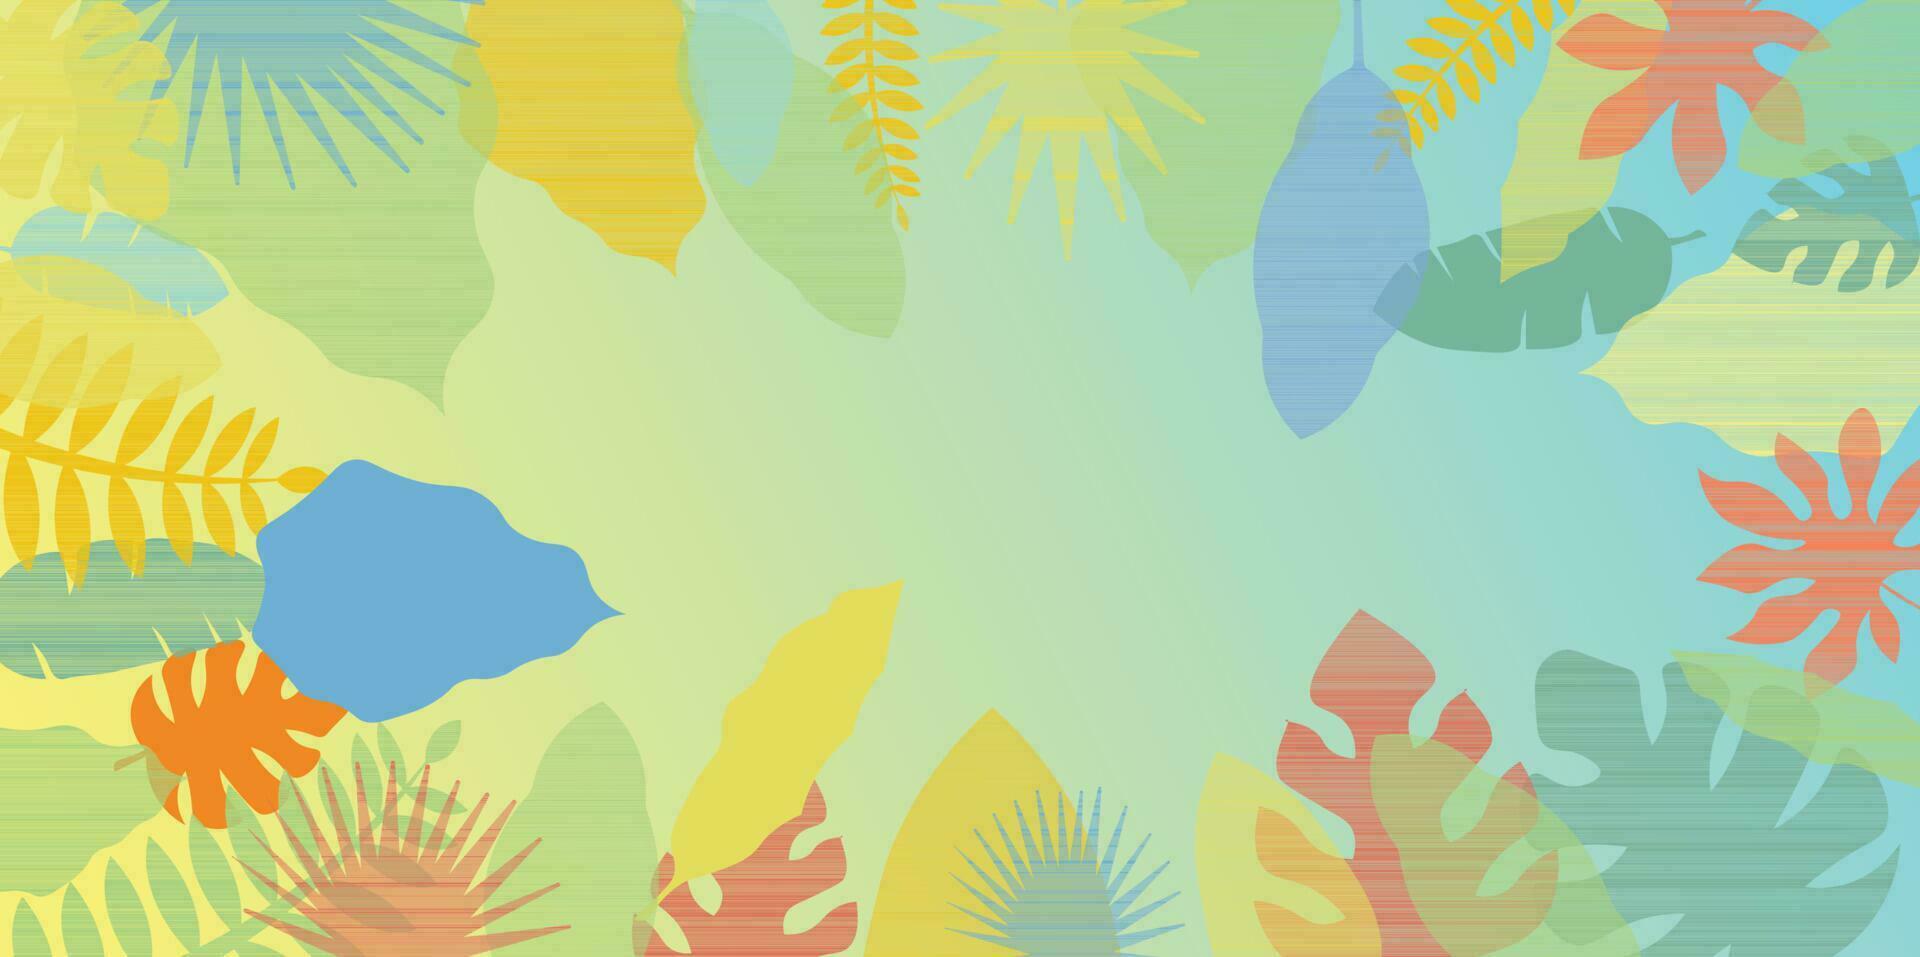 Background design with summer theme vector